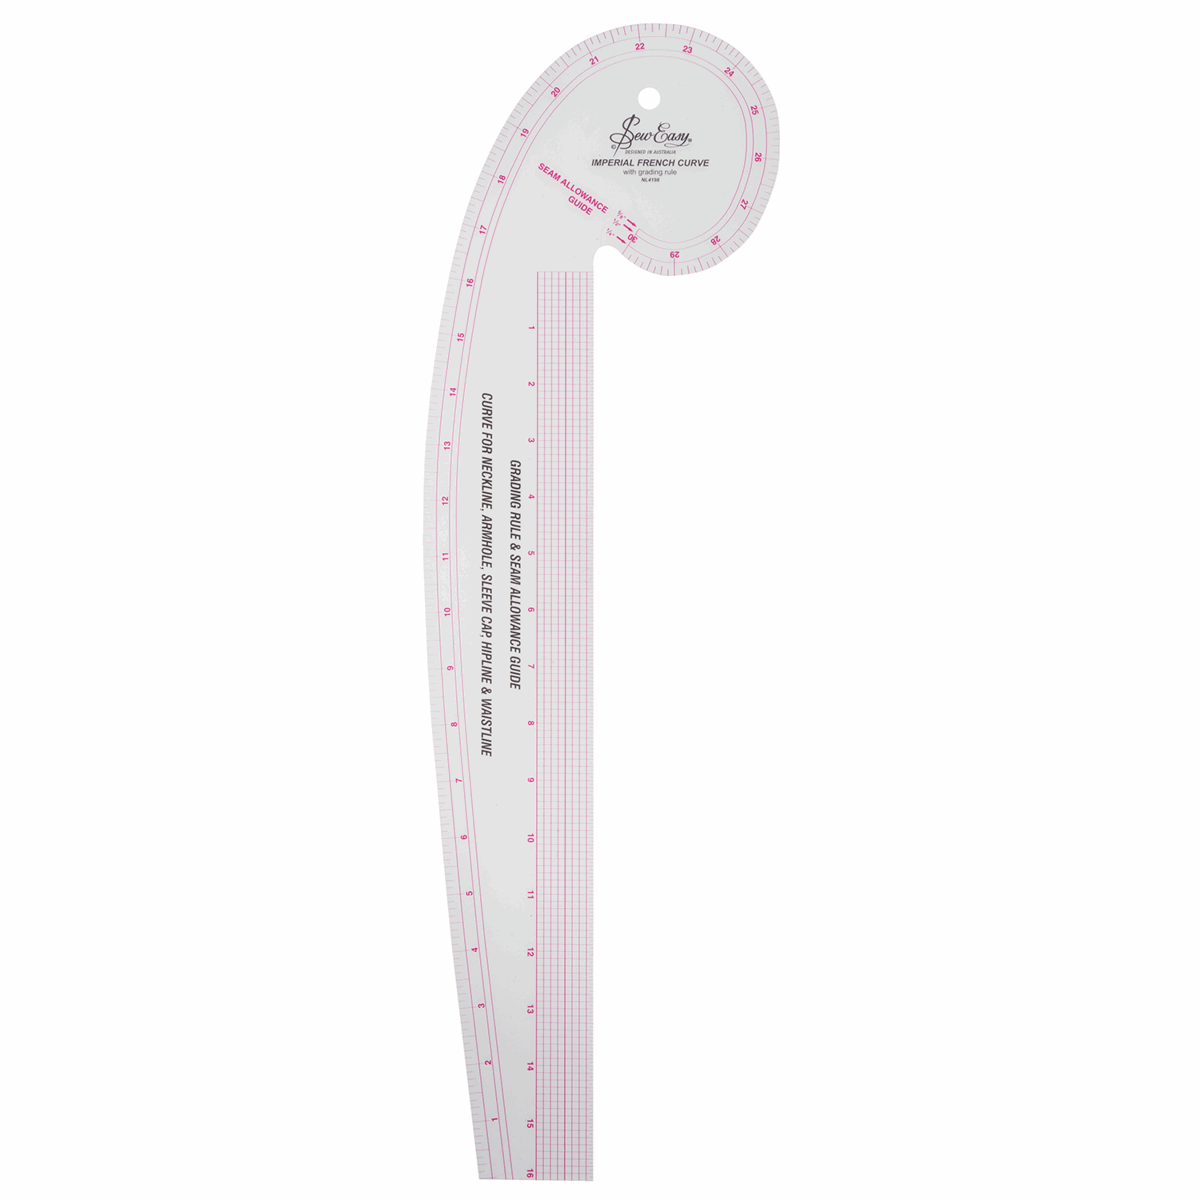 SANON Sew French Curve Metric Ruler,7pcs Sewing Rulers Curves